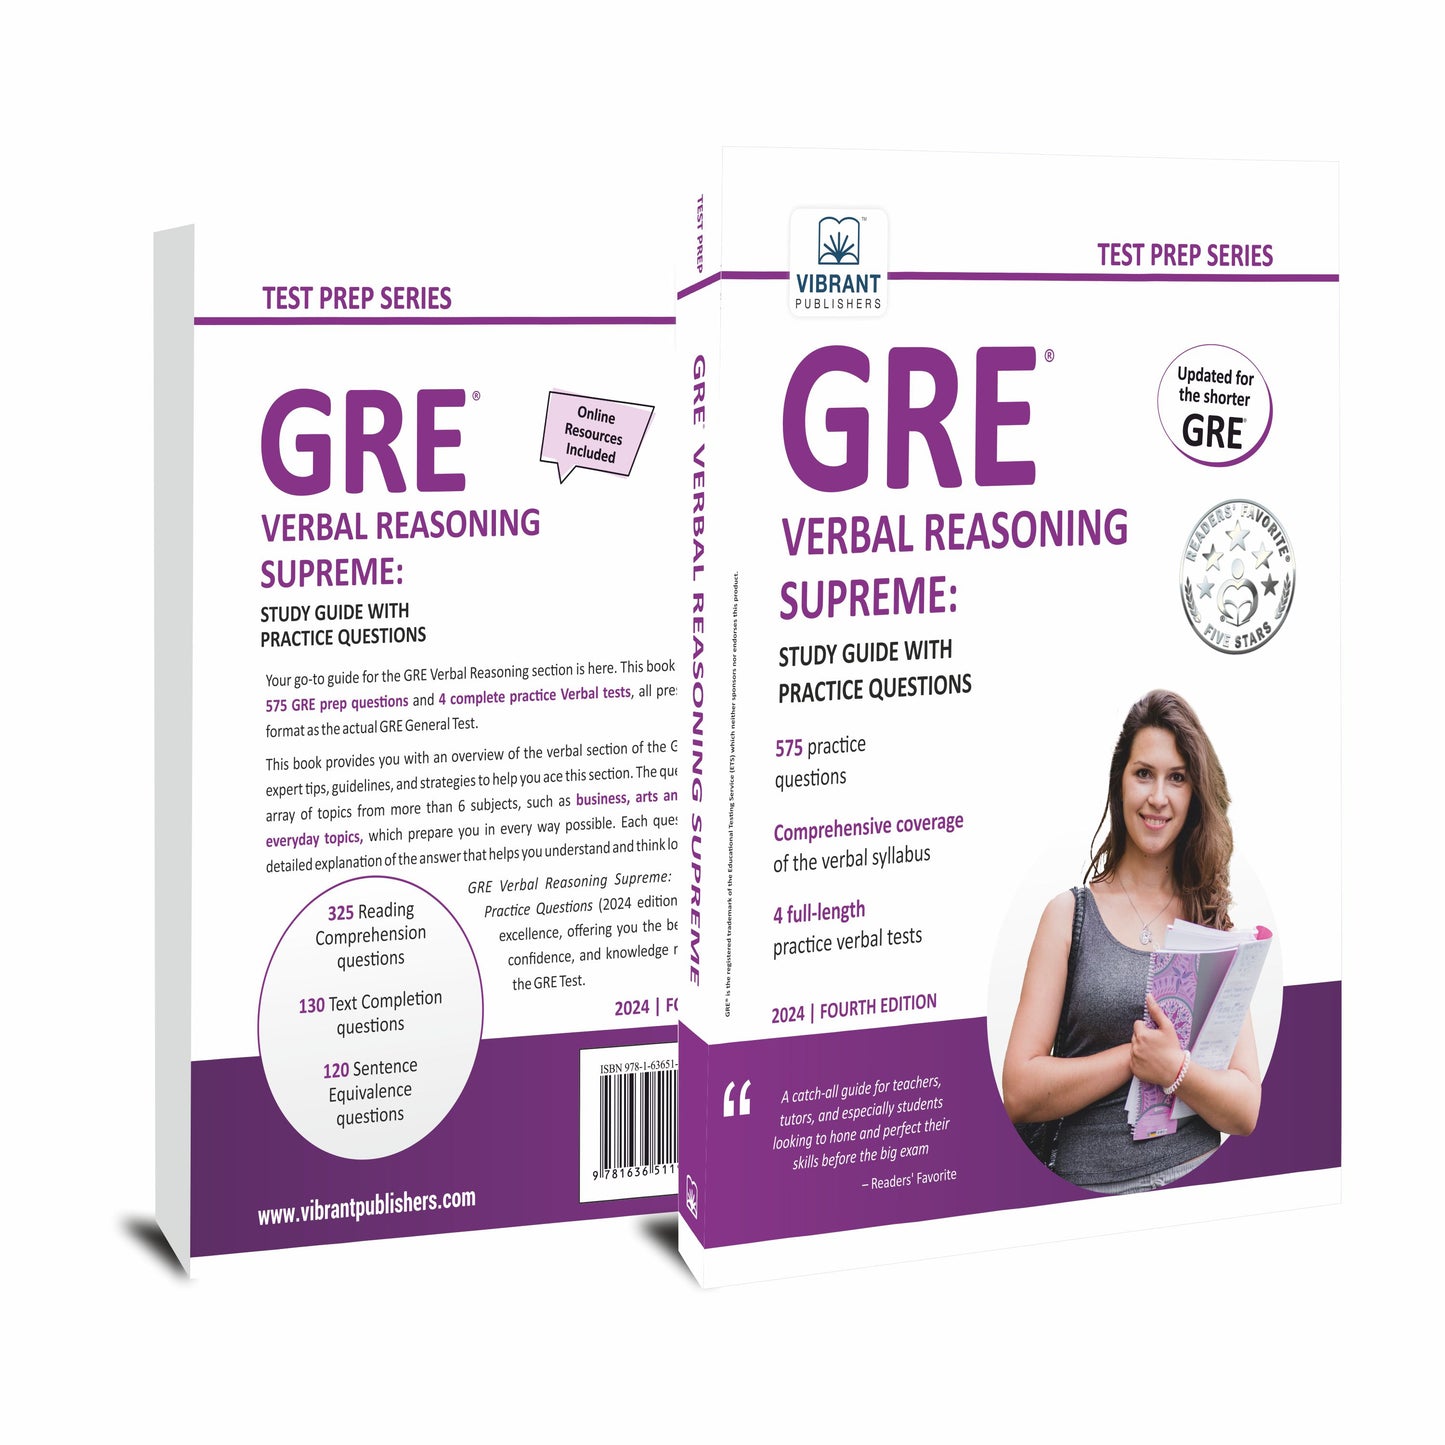 GRE Verbal Reasoning Supreme: Study Guide with Practice Questions (2024 Edition)